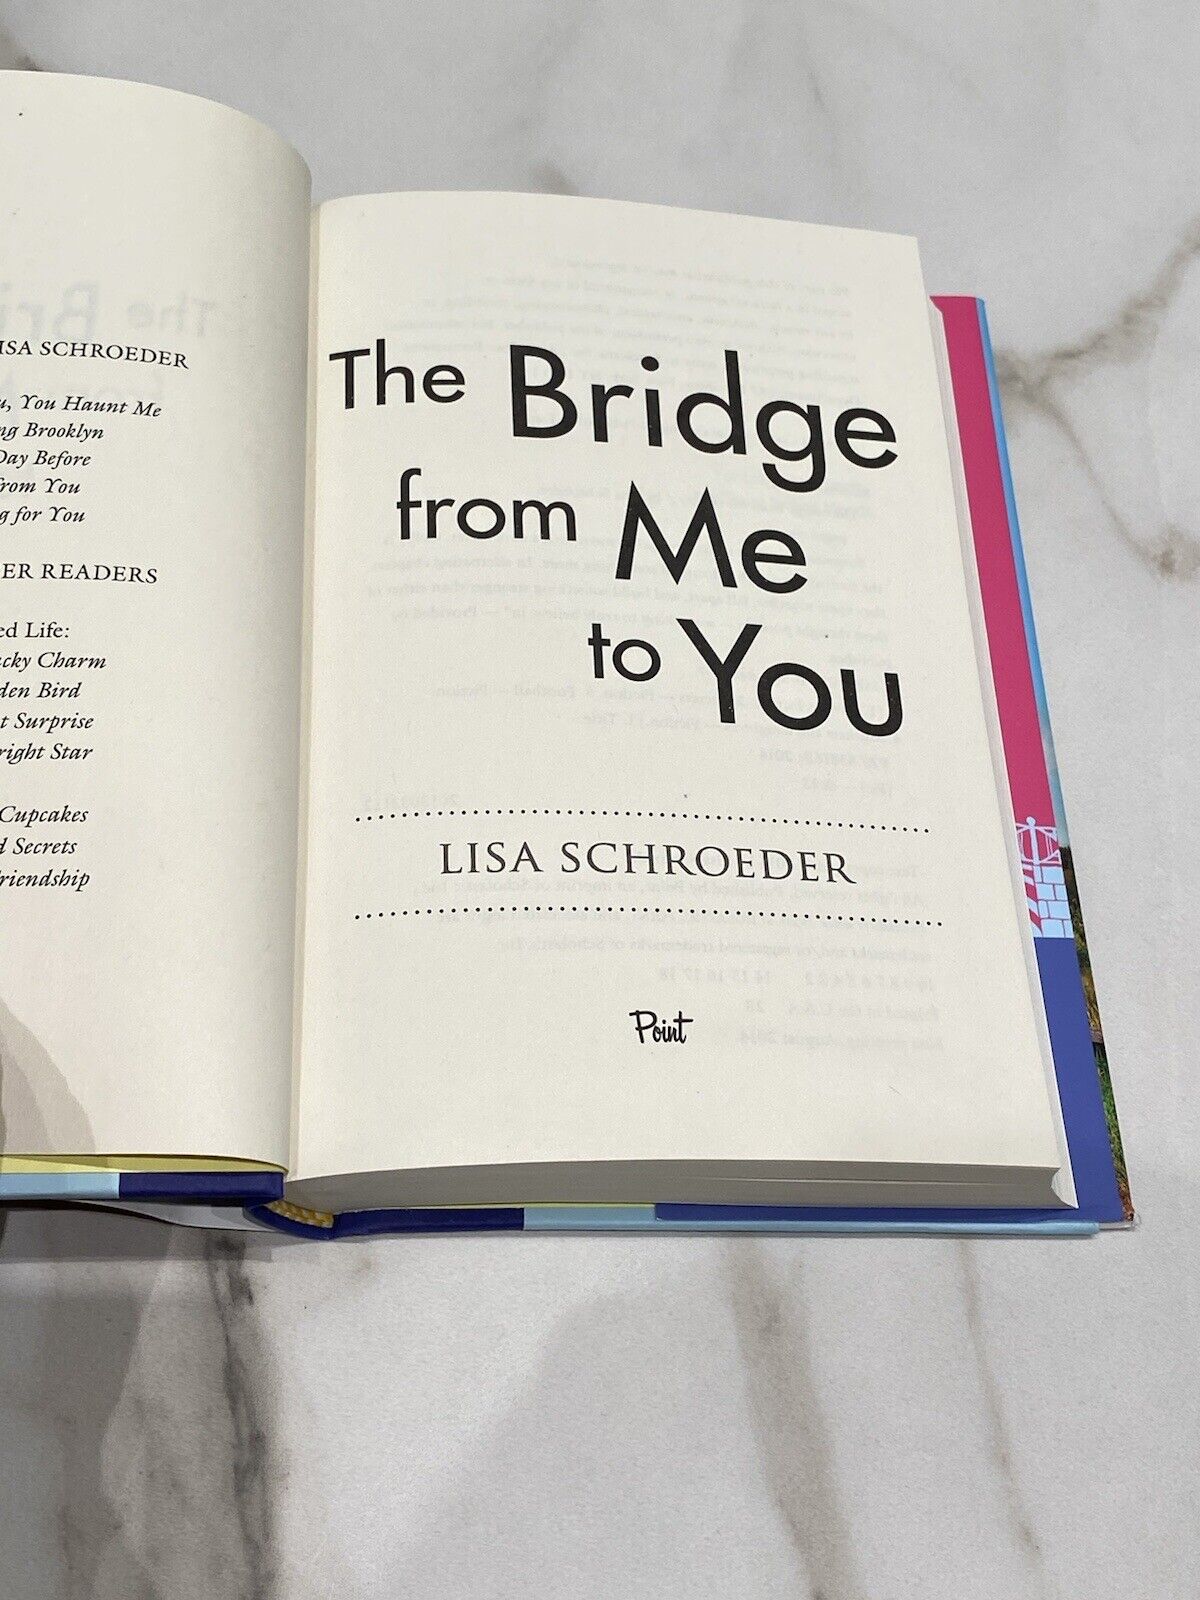 The Day Before, Book by Lisa Schroeder, Official Publisher Page